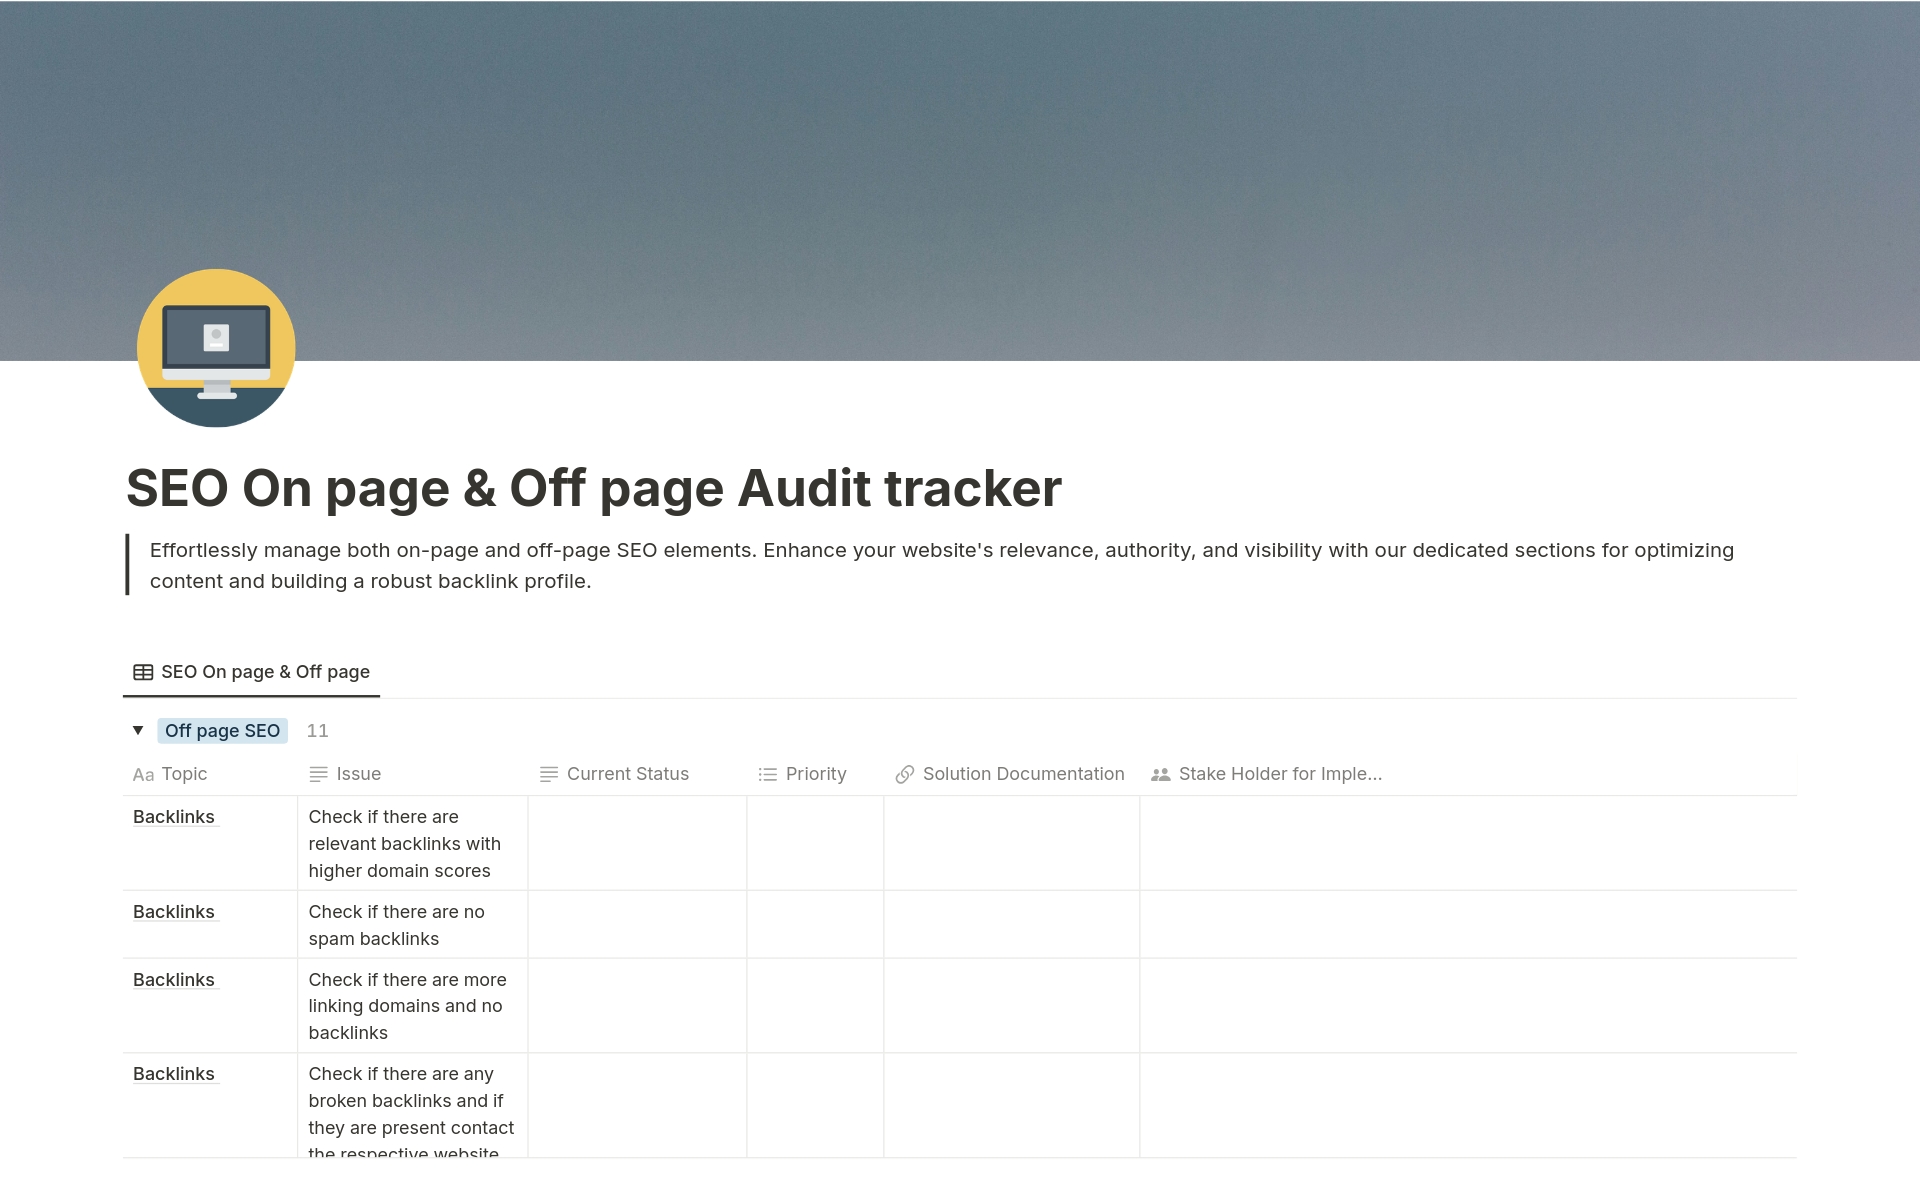 SEO On page & Off page Audit tracker のテンプレートのプレビュー